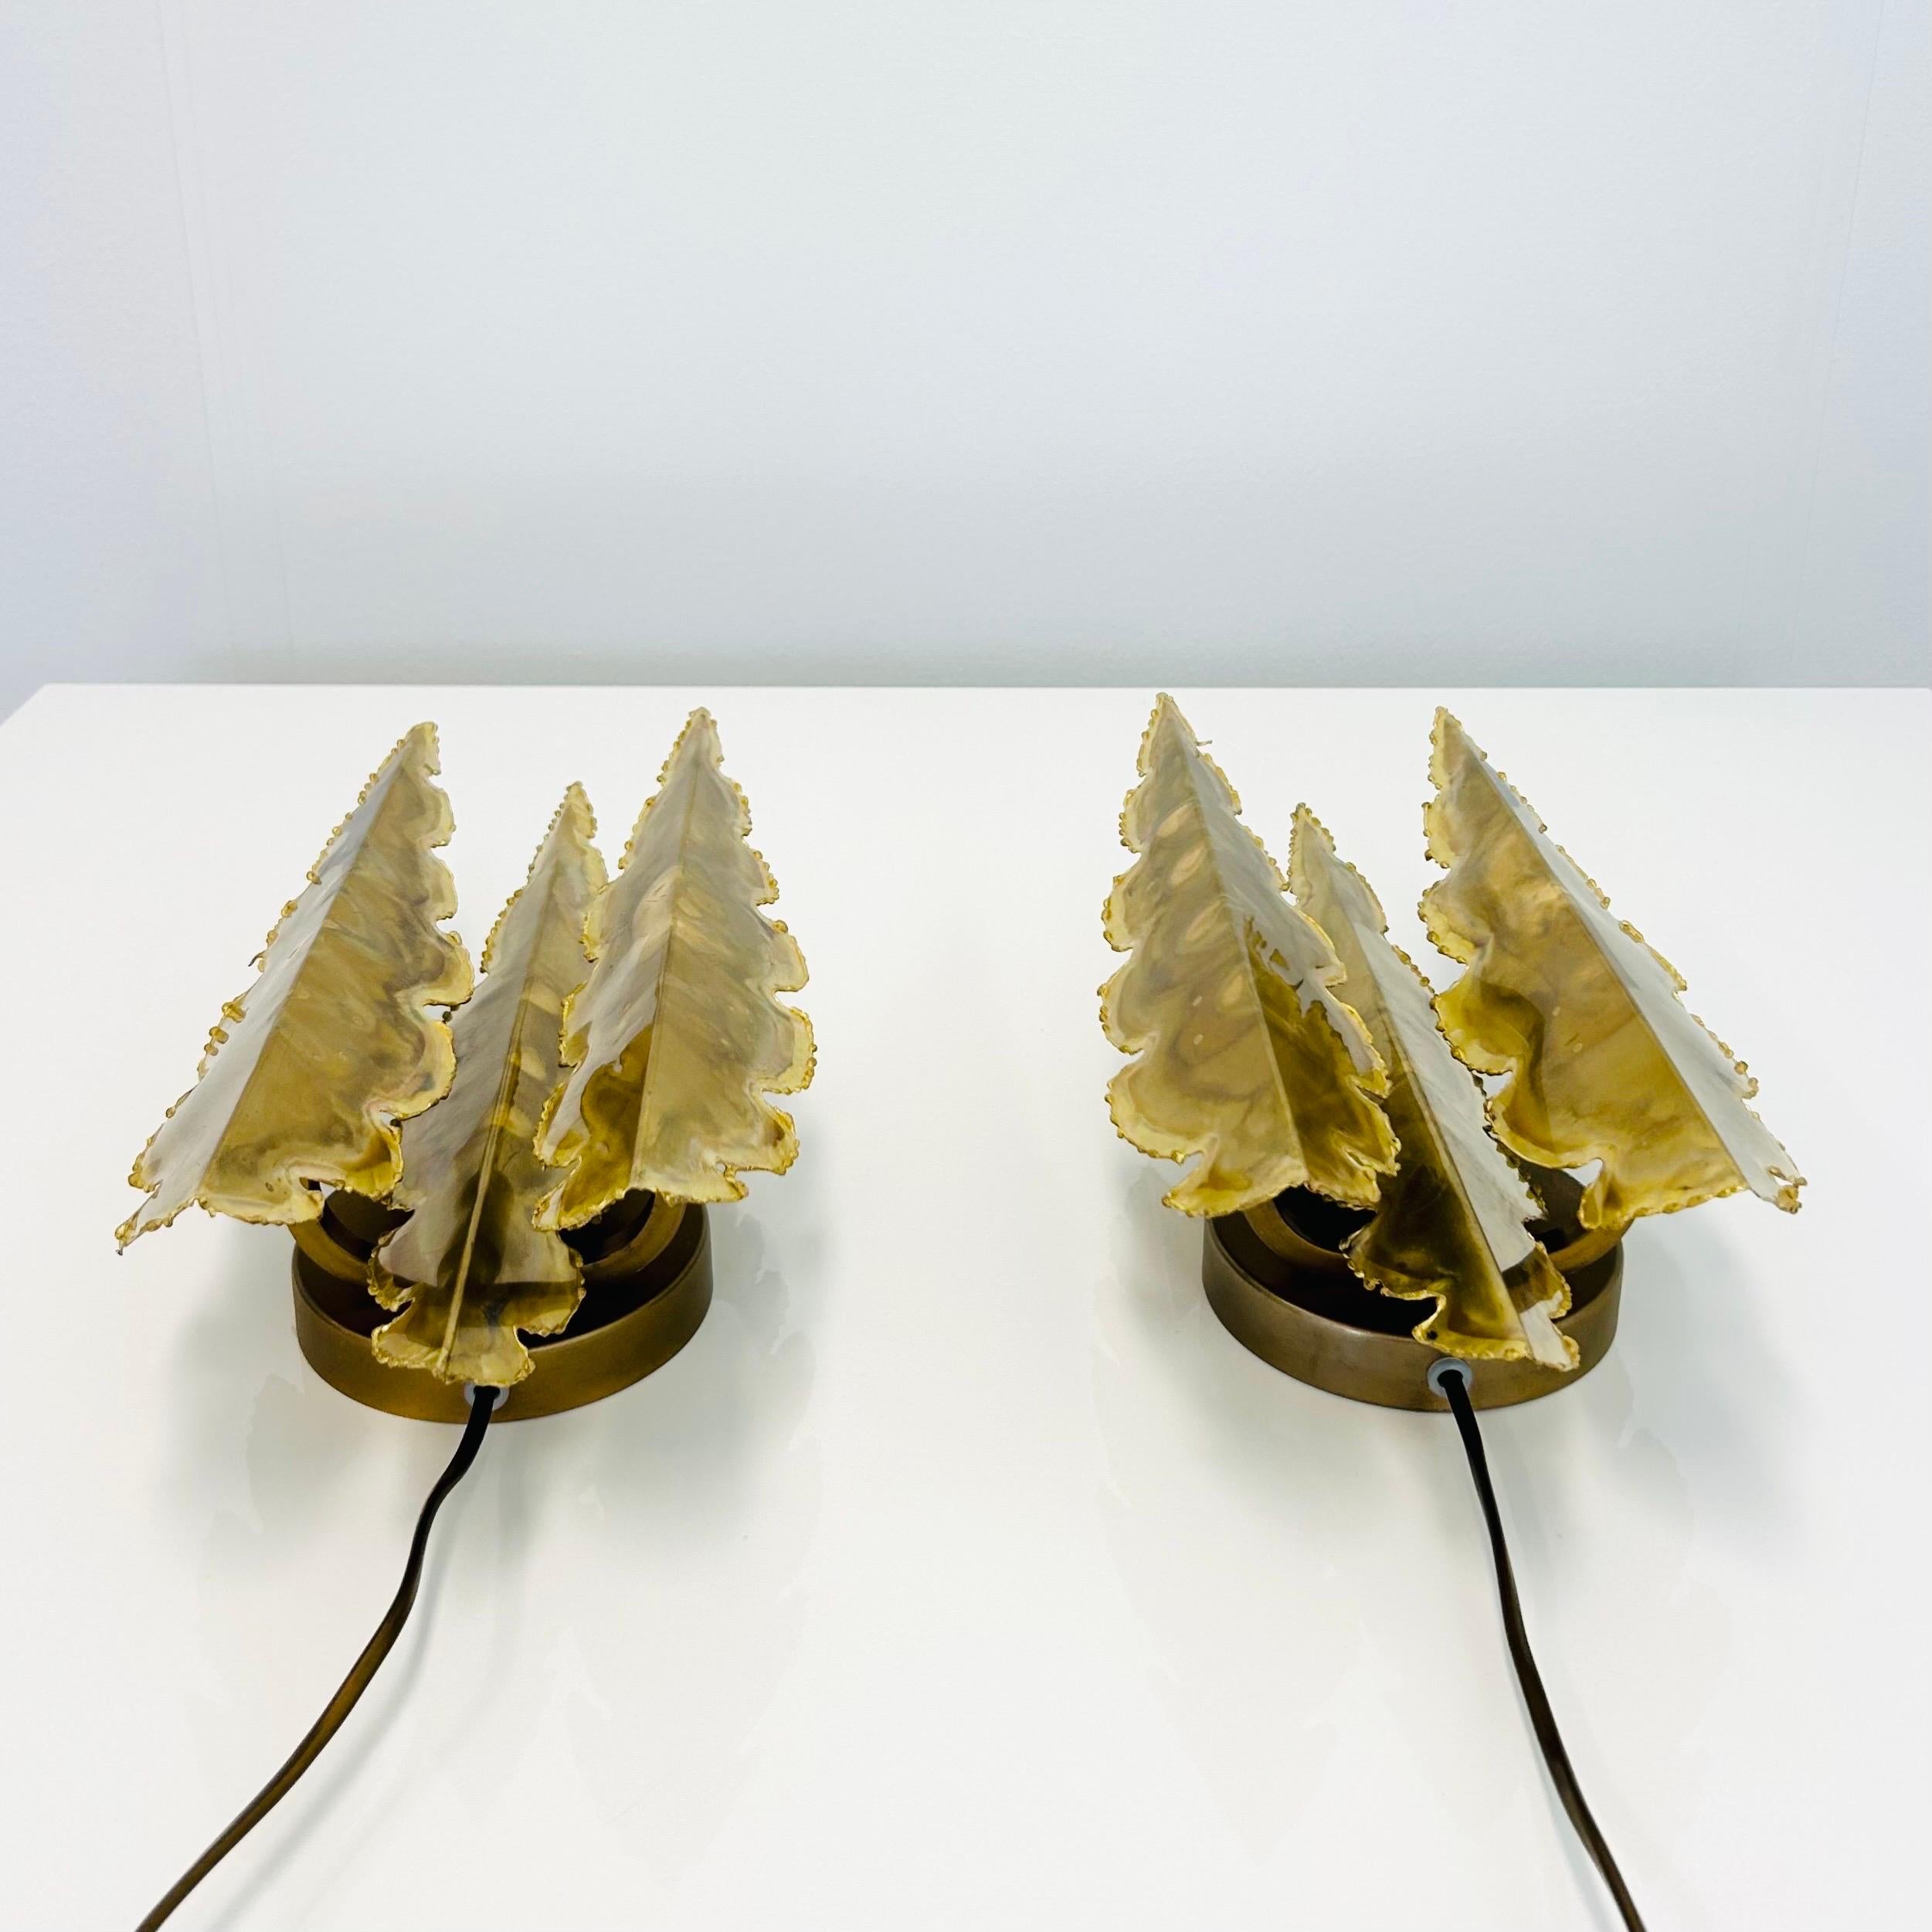 Mid-20th Century Pair of Leaf-Shaped Brass Wall Lamps by Svend Aage Holm Sorensen, 1960s, Denmark